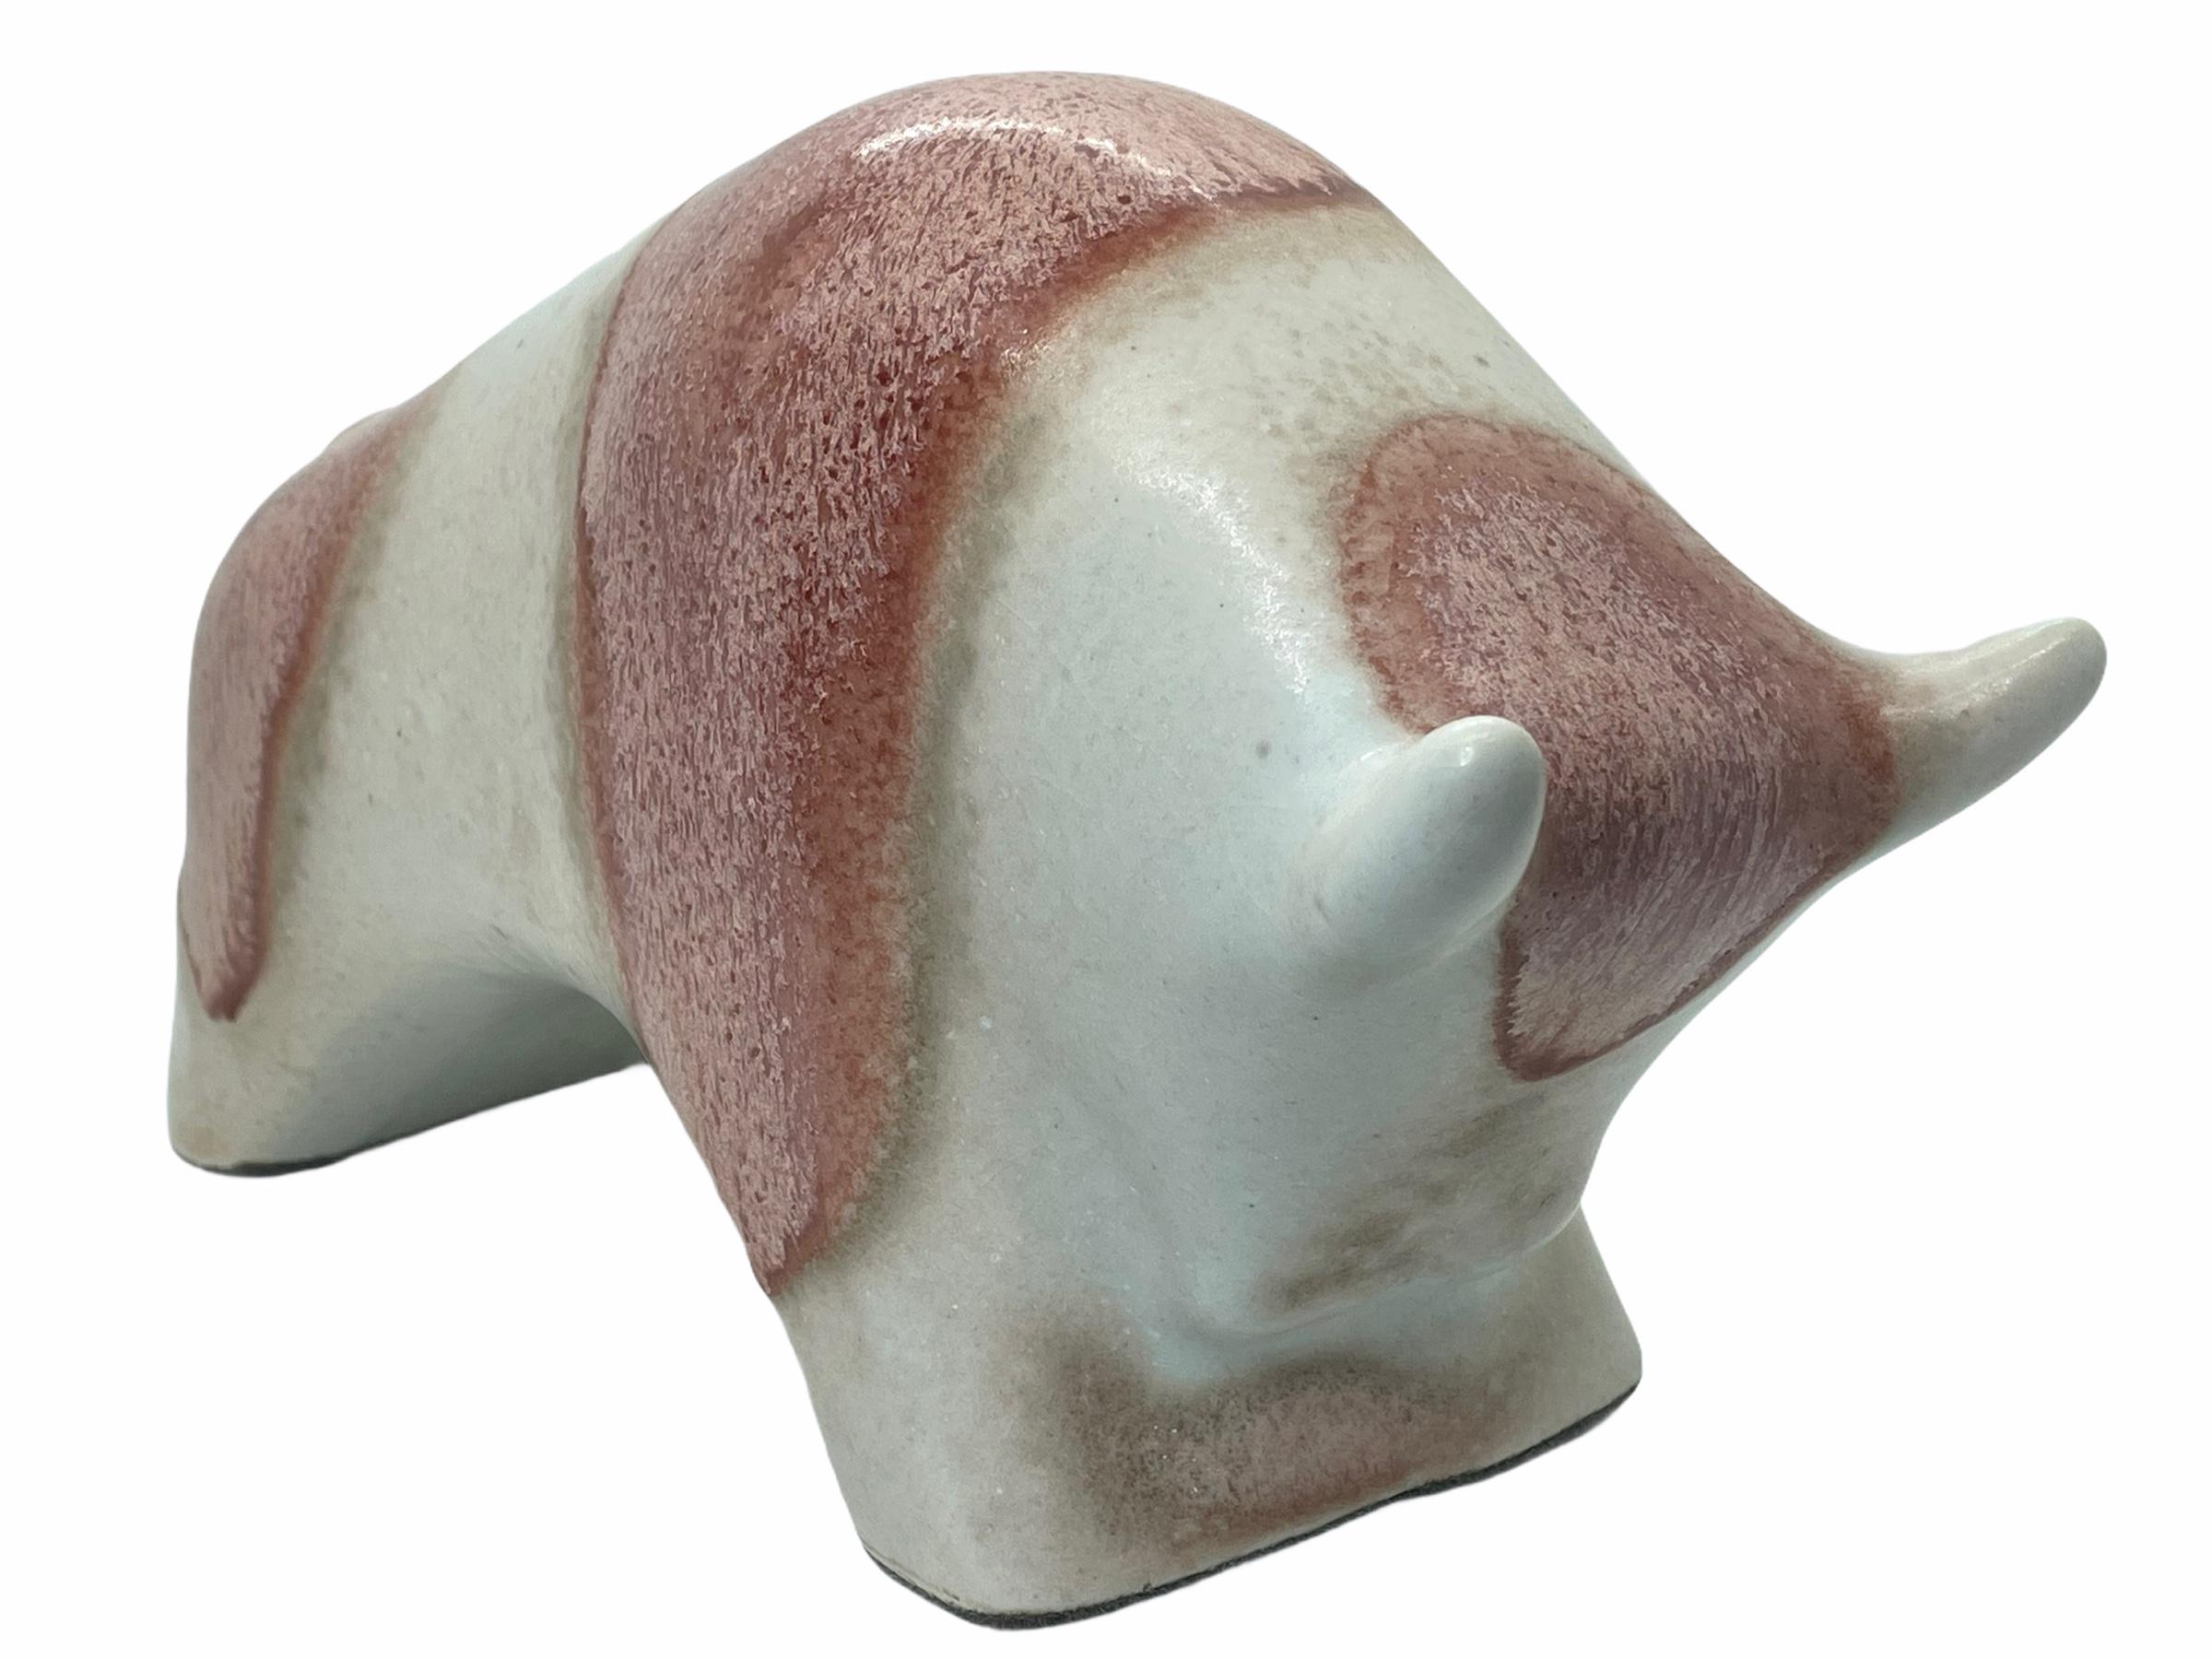 An amazing glazed ceramic Mid-Century Modern bull figurine statue, made in Germany, circa 1970s by Otto Keramik. Ivory and red colors. It is in very good condition with no chips, cracks, or flea bites.